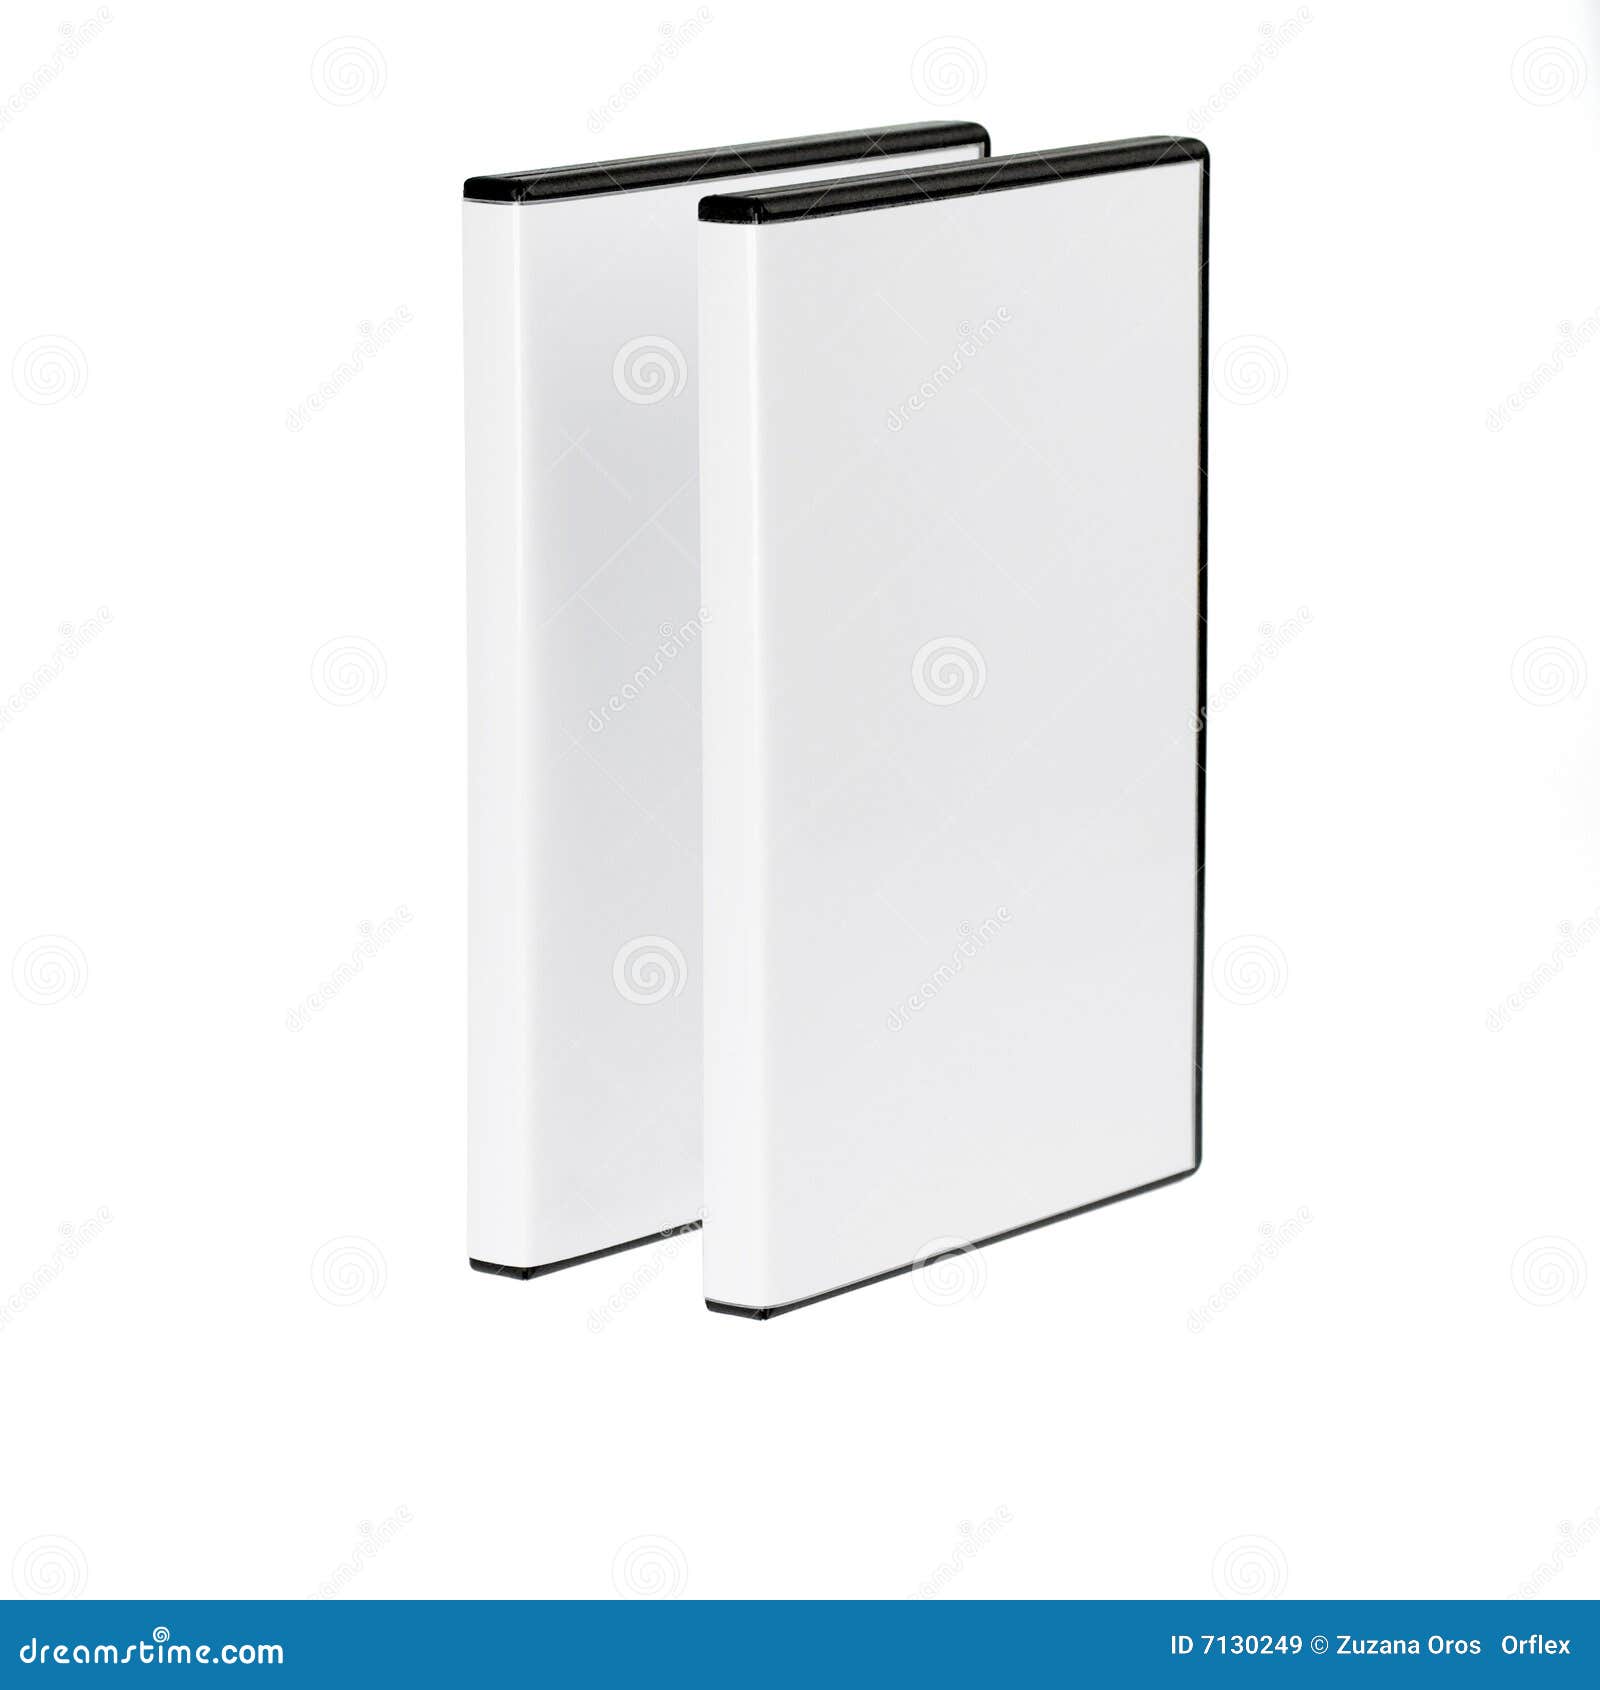 Two Dvd Boxes Separated On White Stock Image Image Of Blank Separated